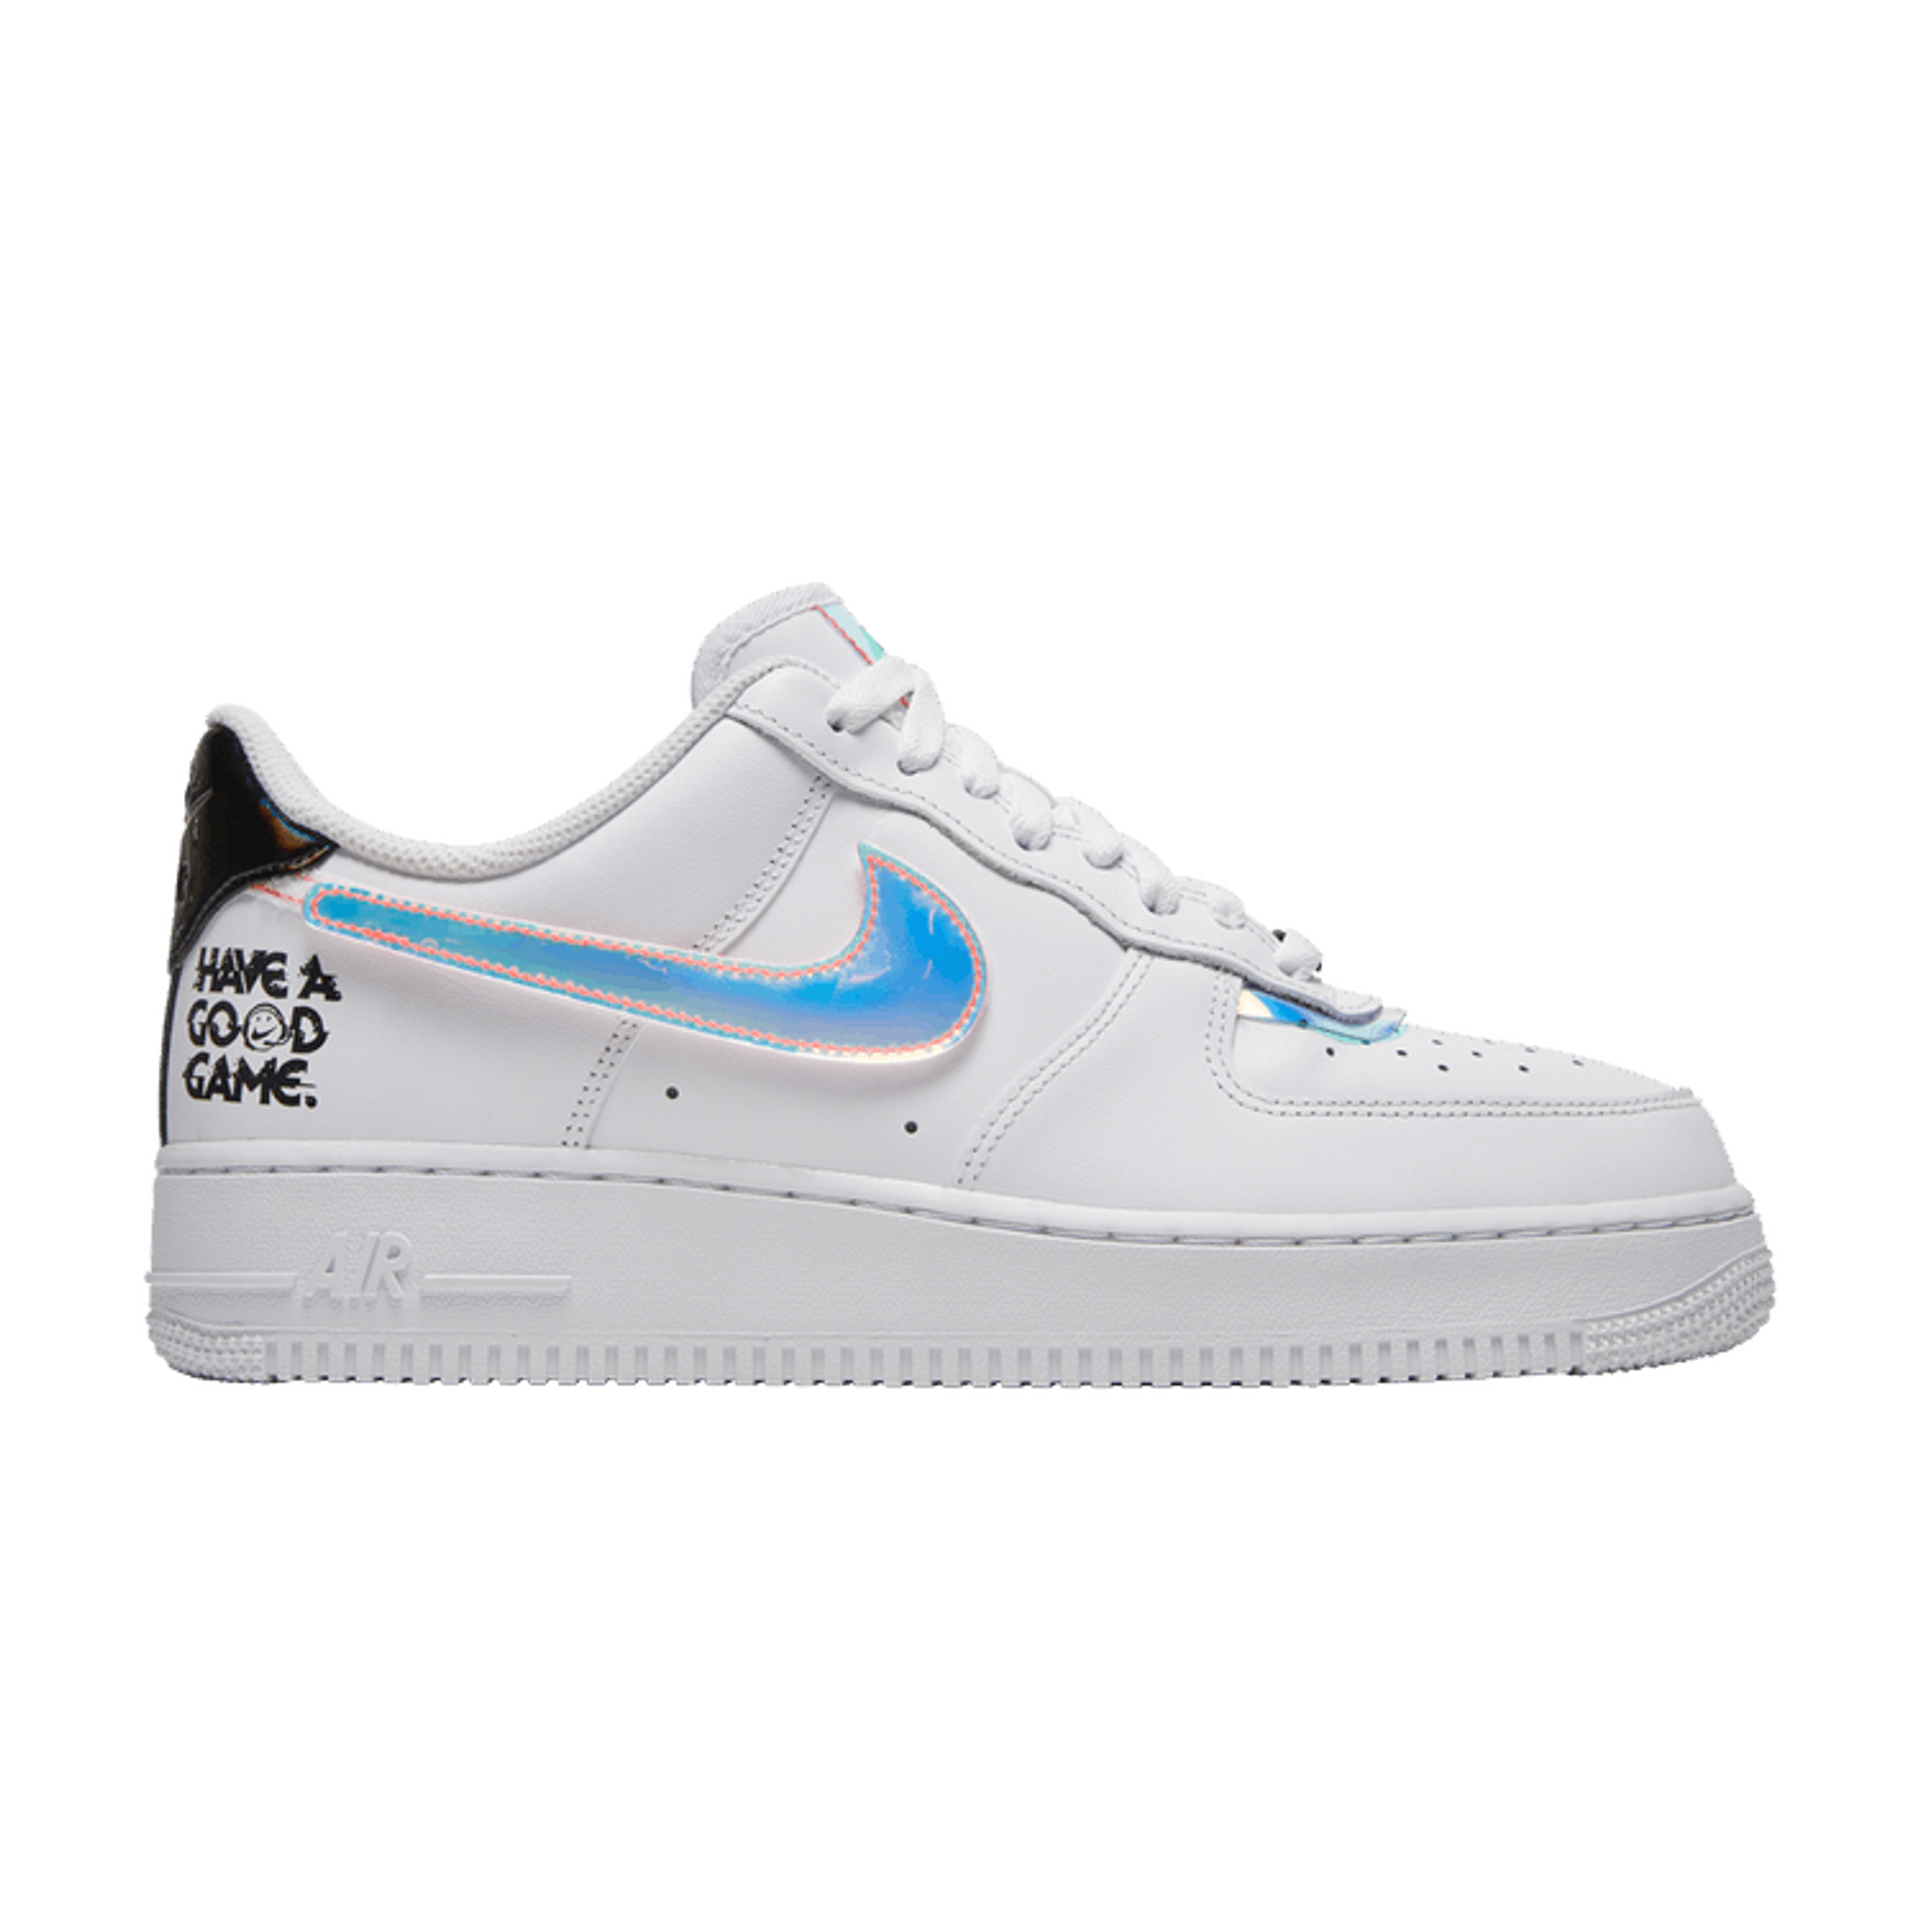 Air Force 1 '07 LV8 'Have a Good Game'